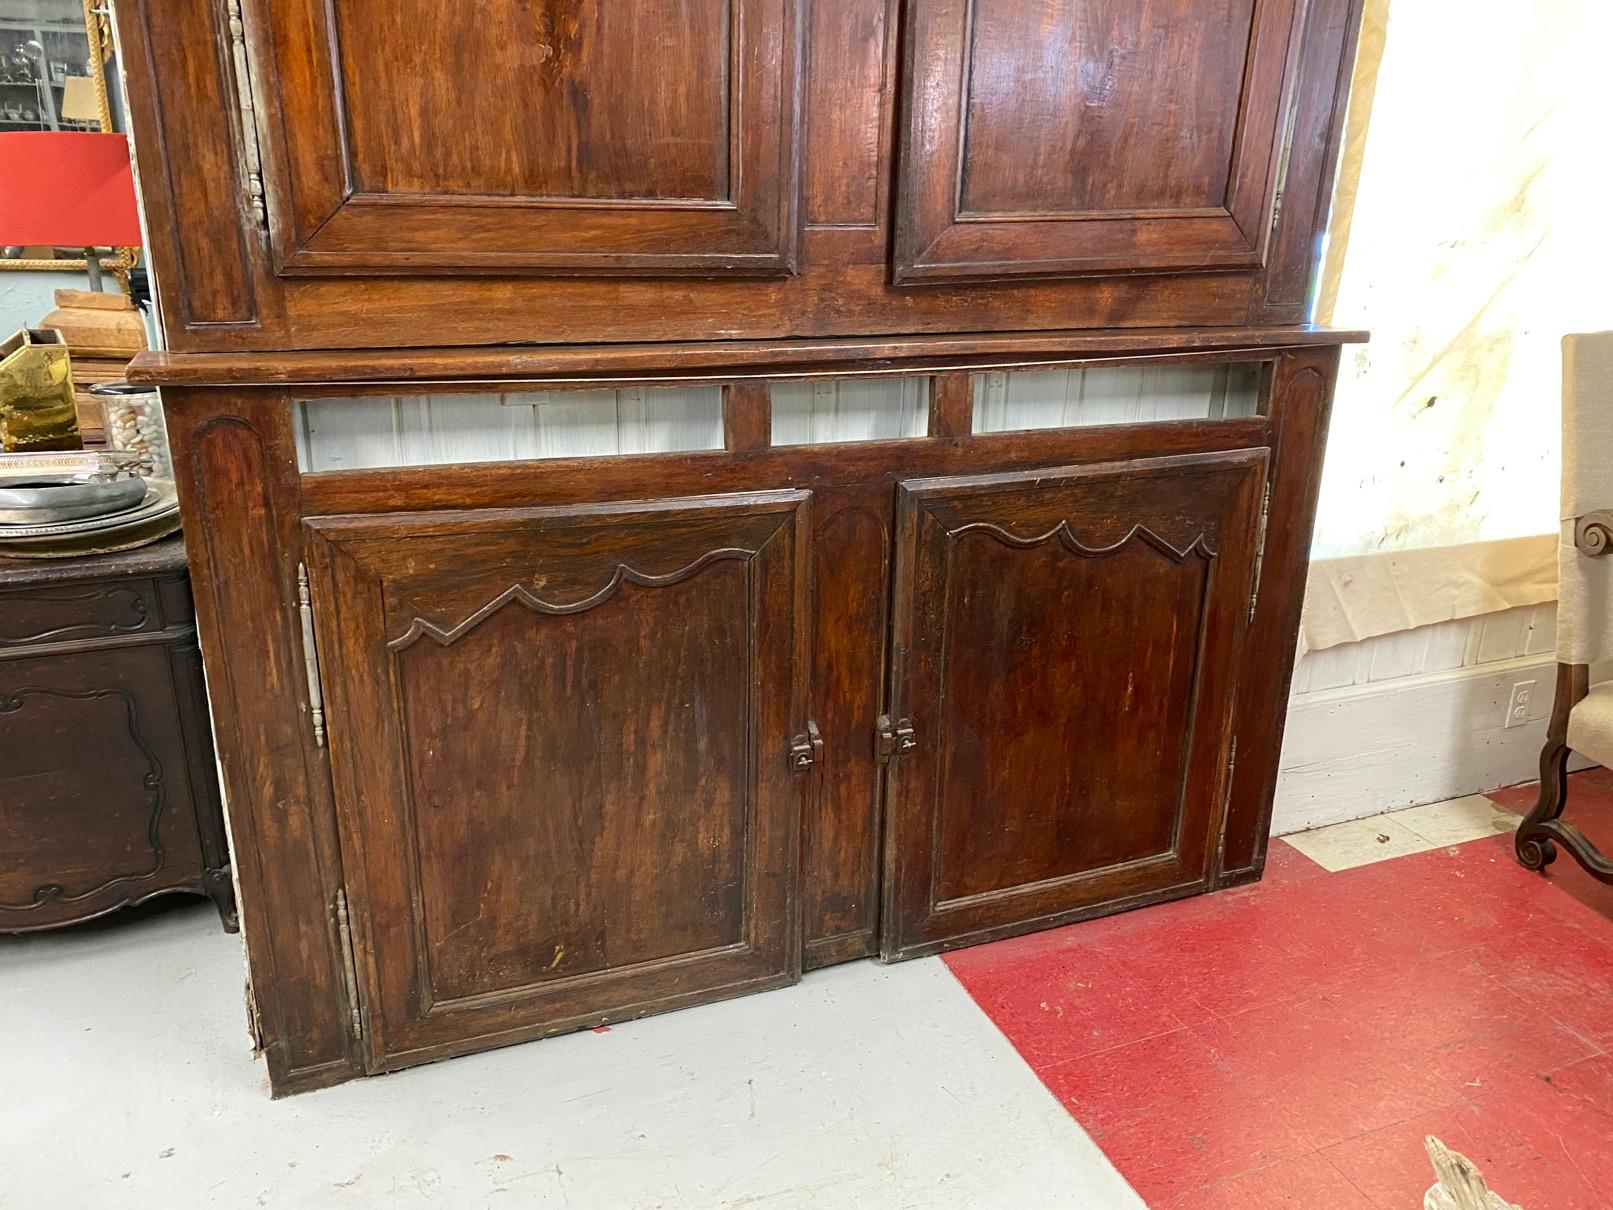 Late 18th Century French Paneled Boiserie Storage Wall Unit In Good Condition For Sale In Sheffield, MA